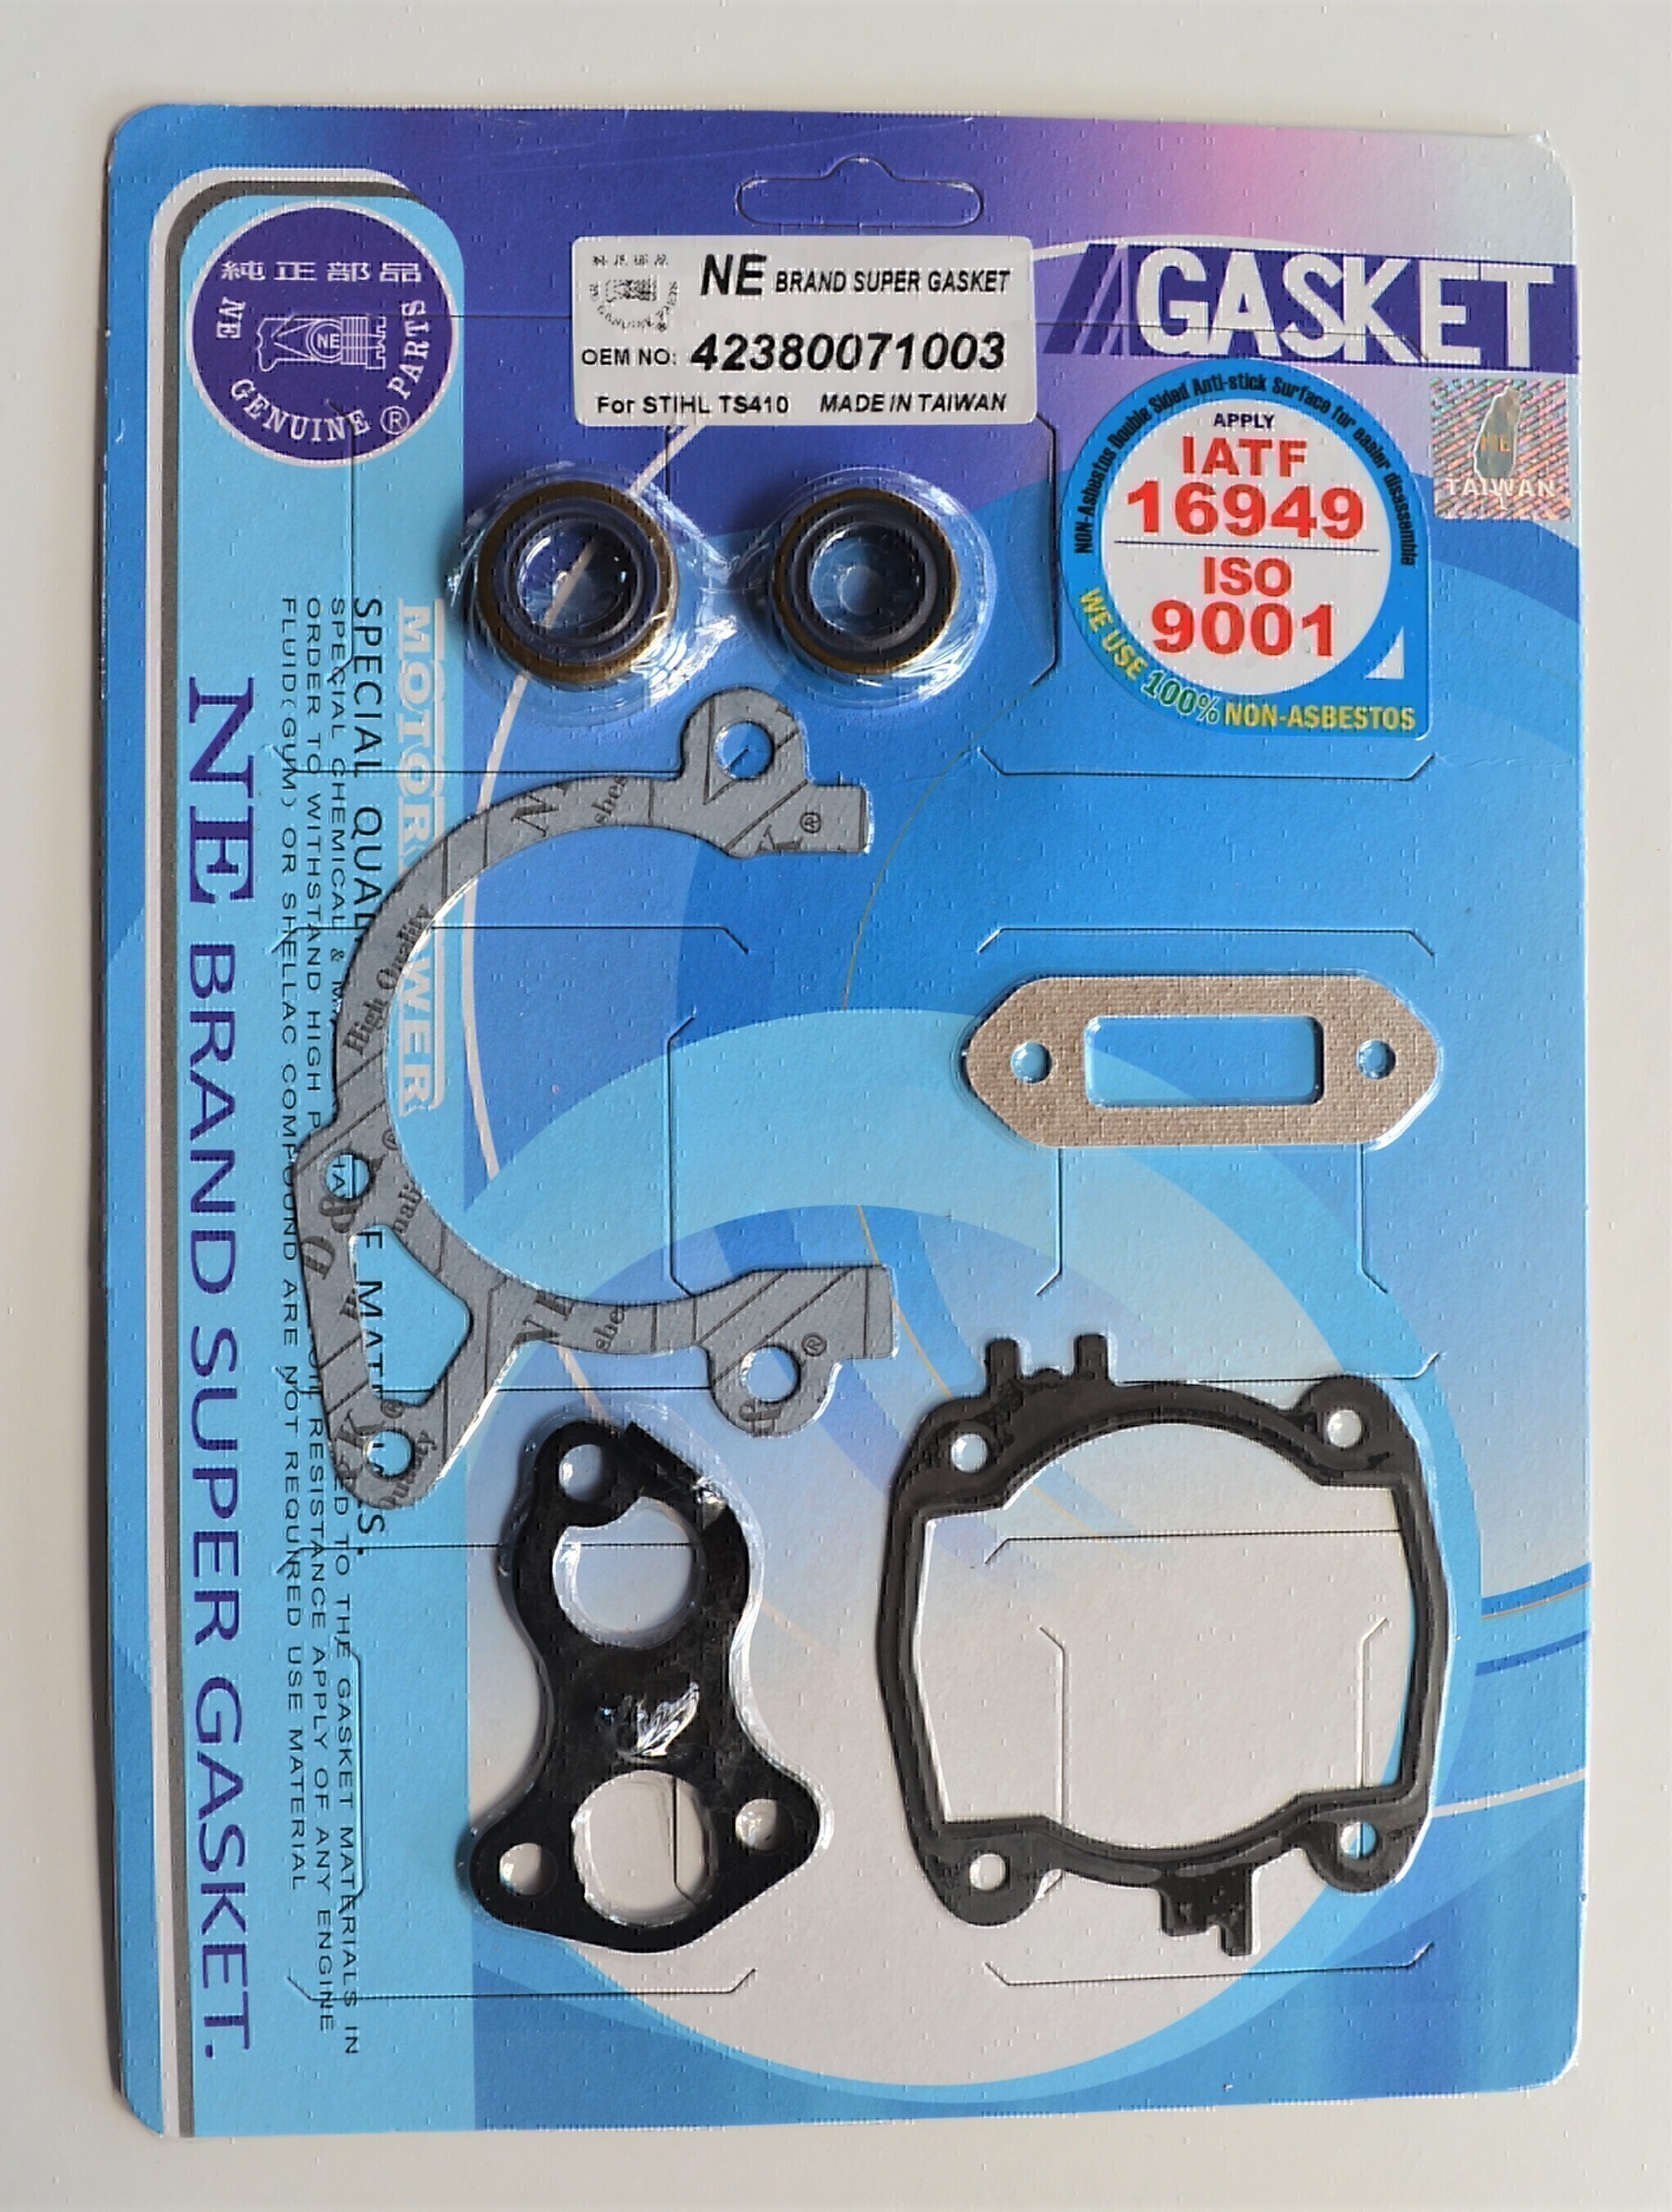 COMPLETE GASKET & OIL SEAL KIT FOR STIHL TS410 TS420 CUT OFF SAW # 42380071003